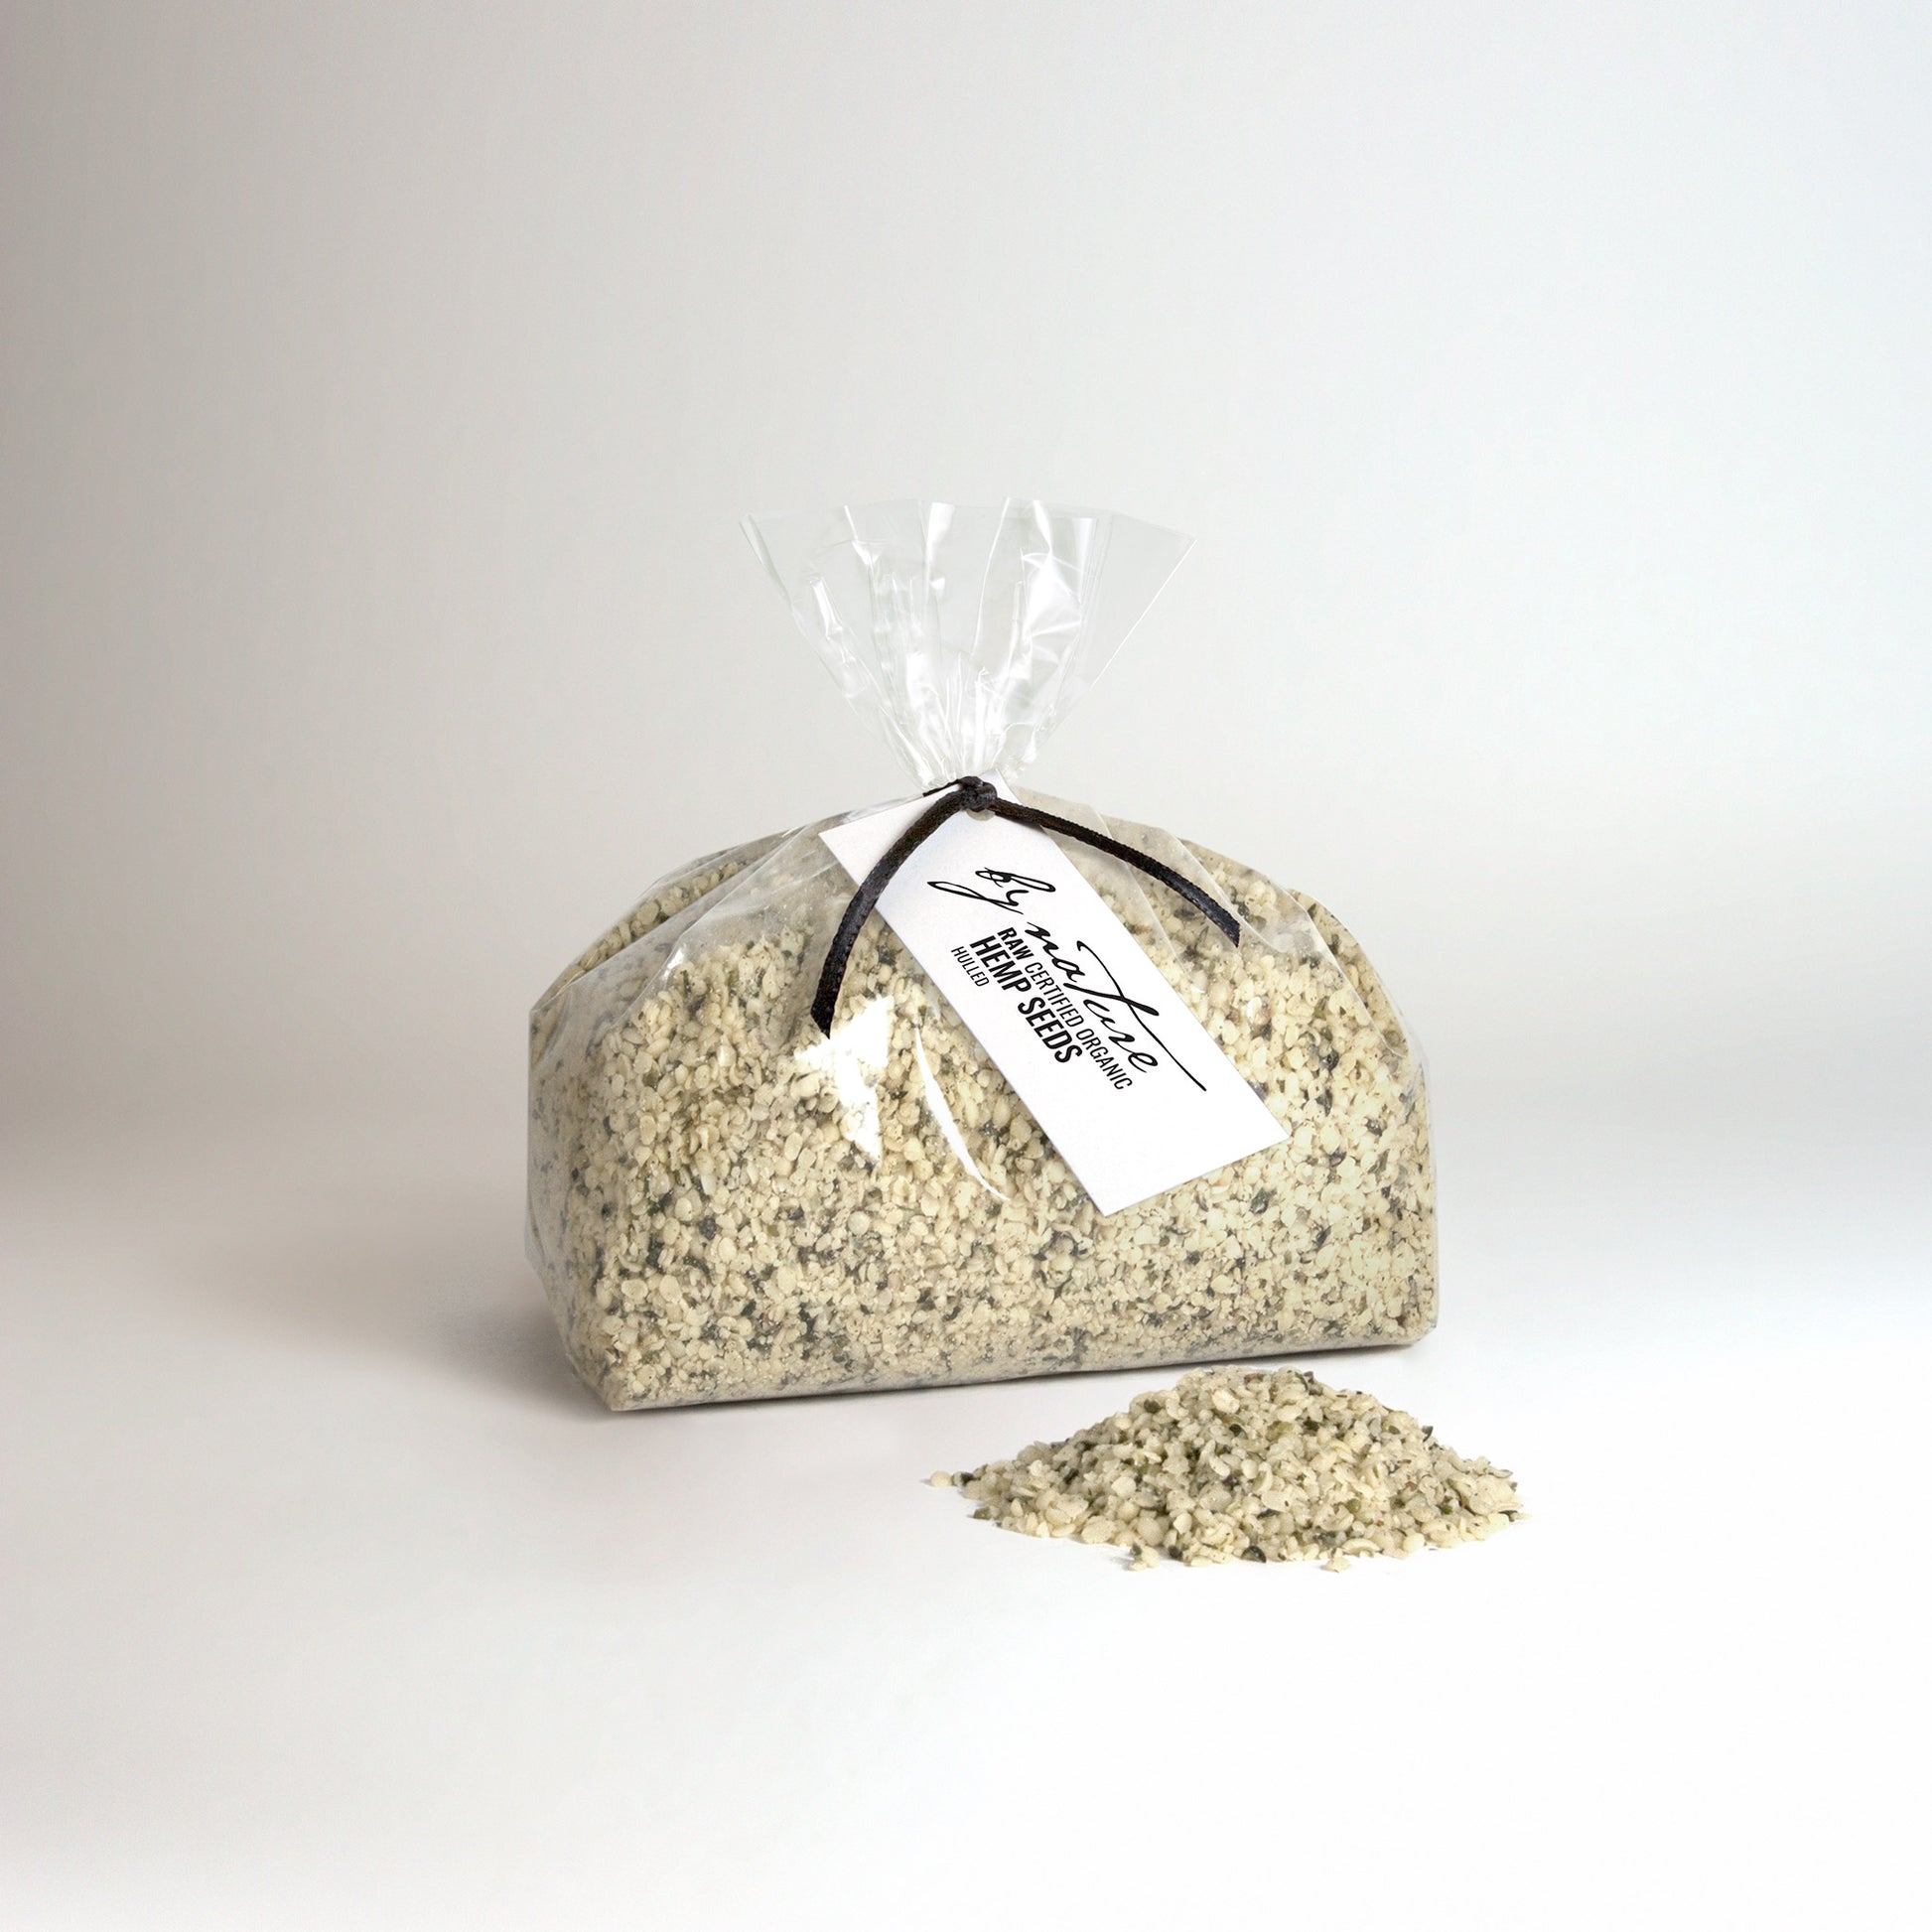 BY NATURE Hemp Seeds, 500g - hulled, raw, certified organic at source.